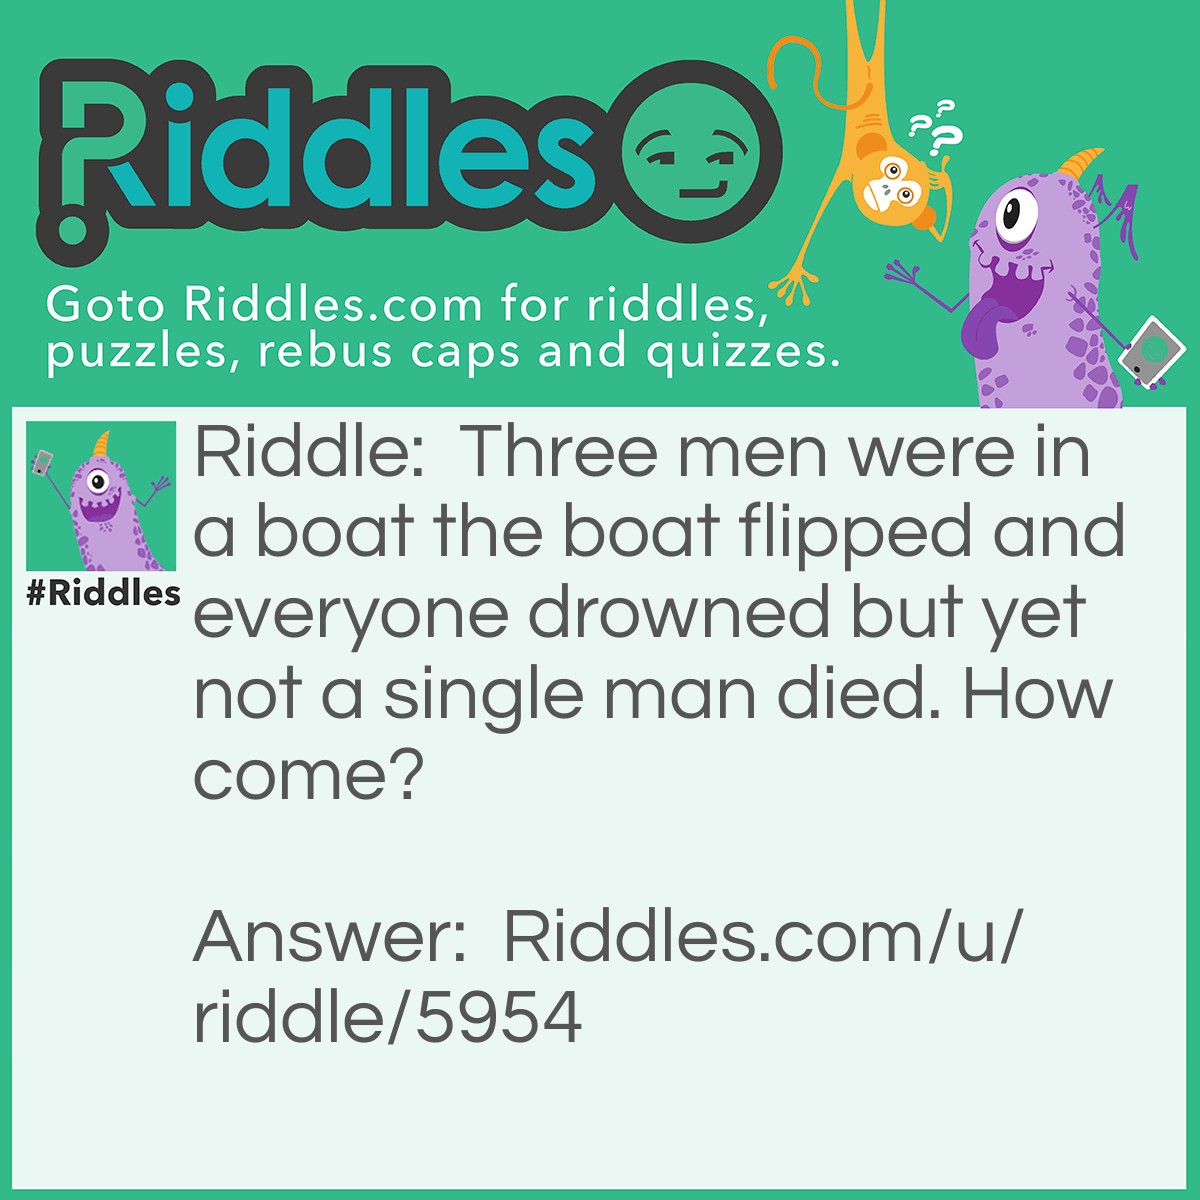 Riddle: Three men were in a boat the boat flipped and everyone drowned but yet not a single man died. How come? Answer: The men were married look carefully in the riddle.